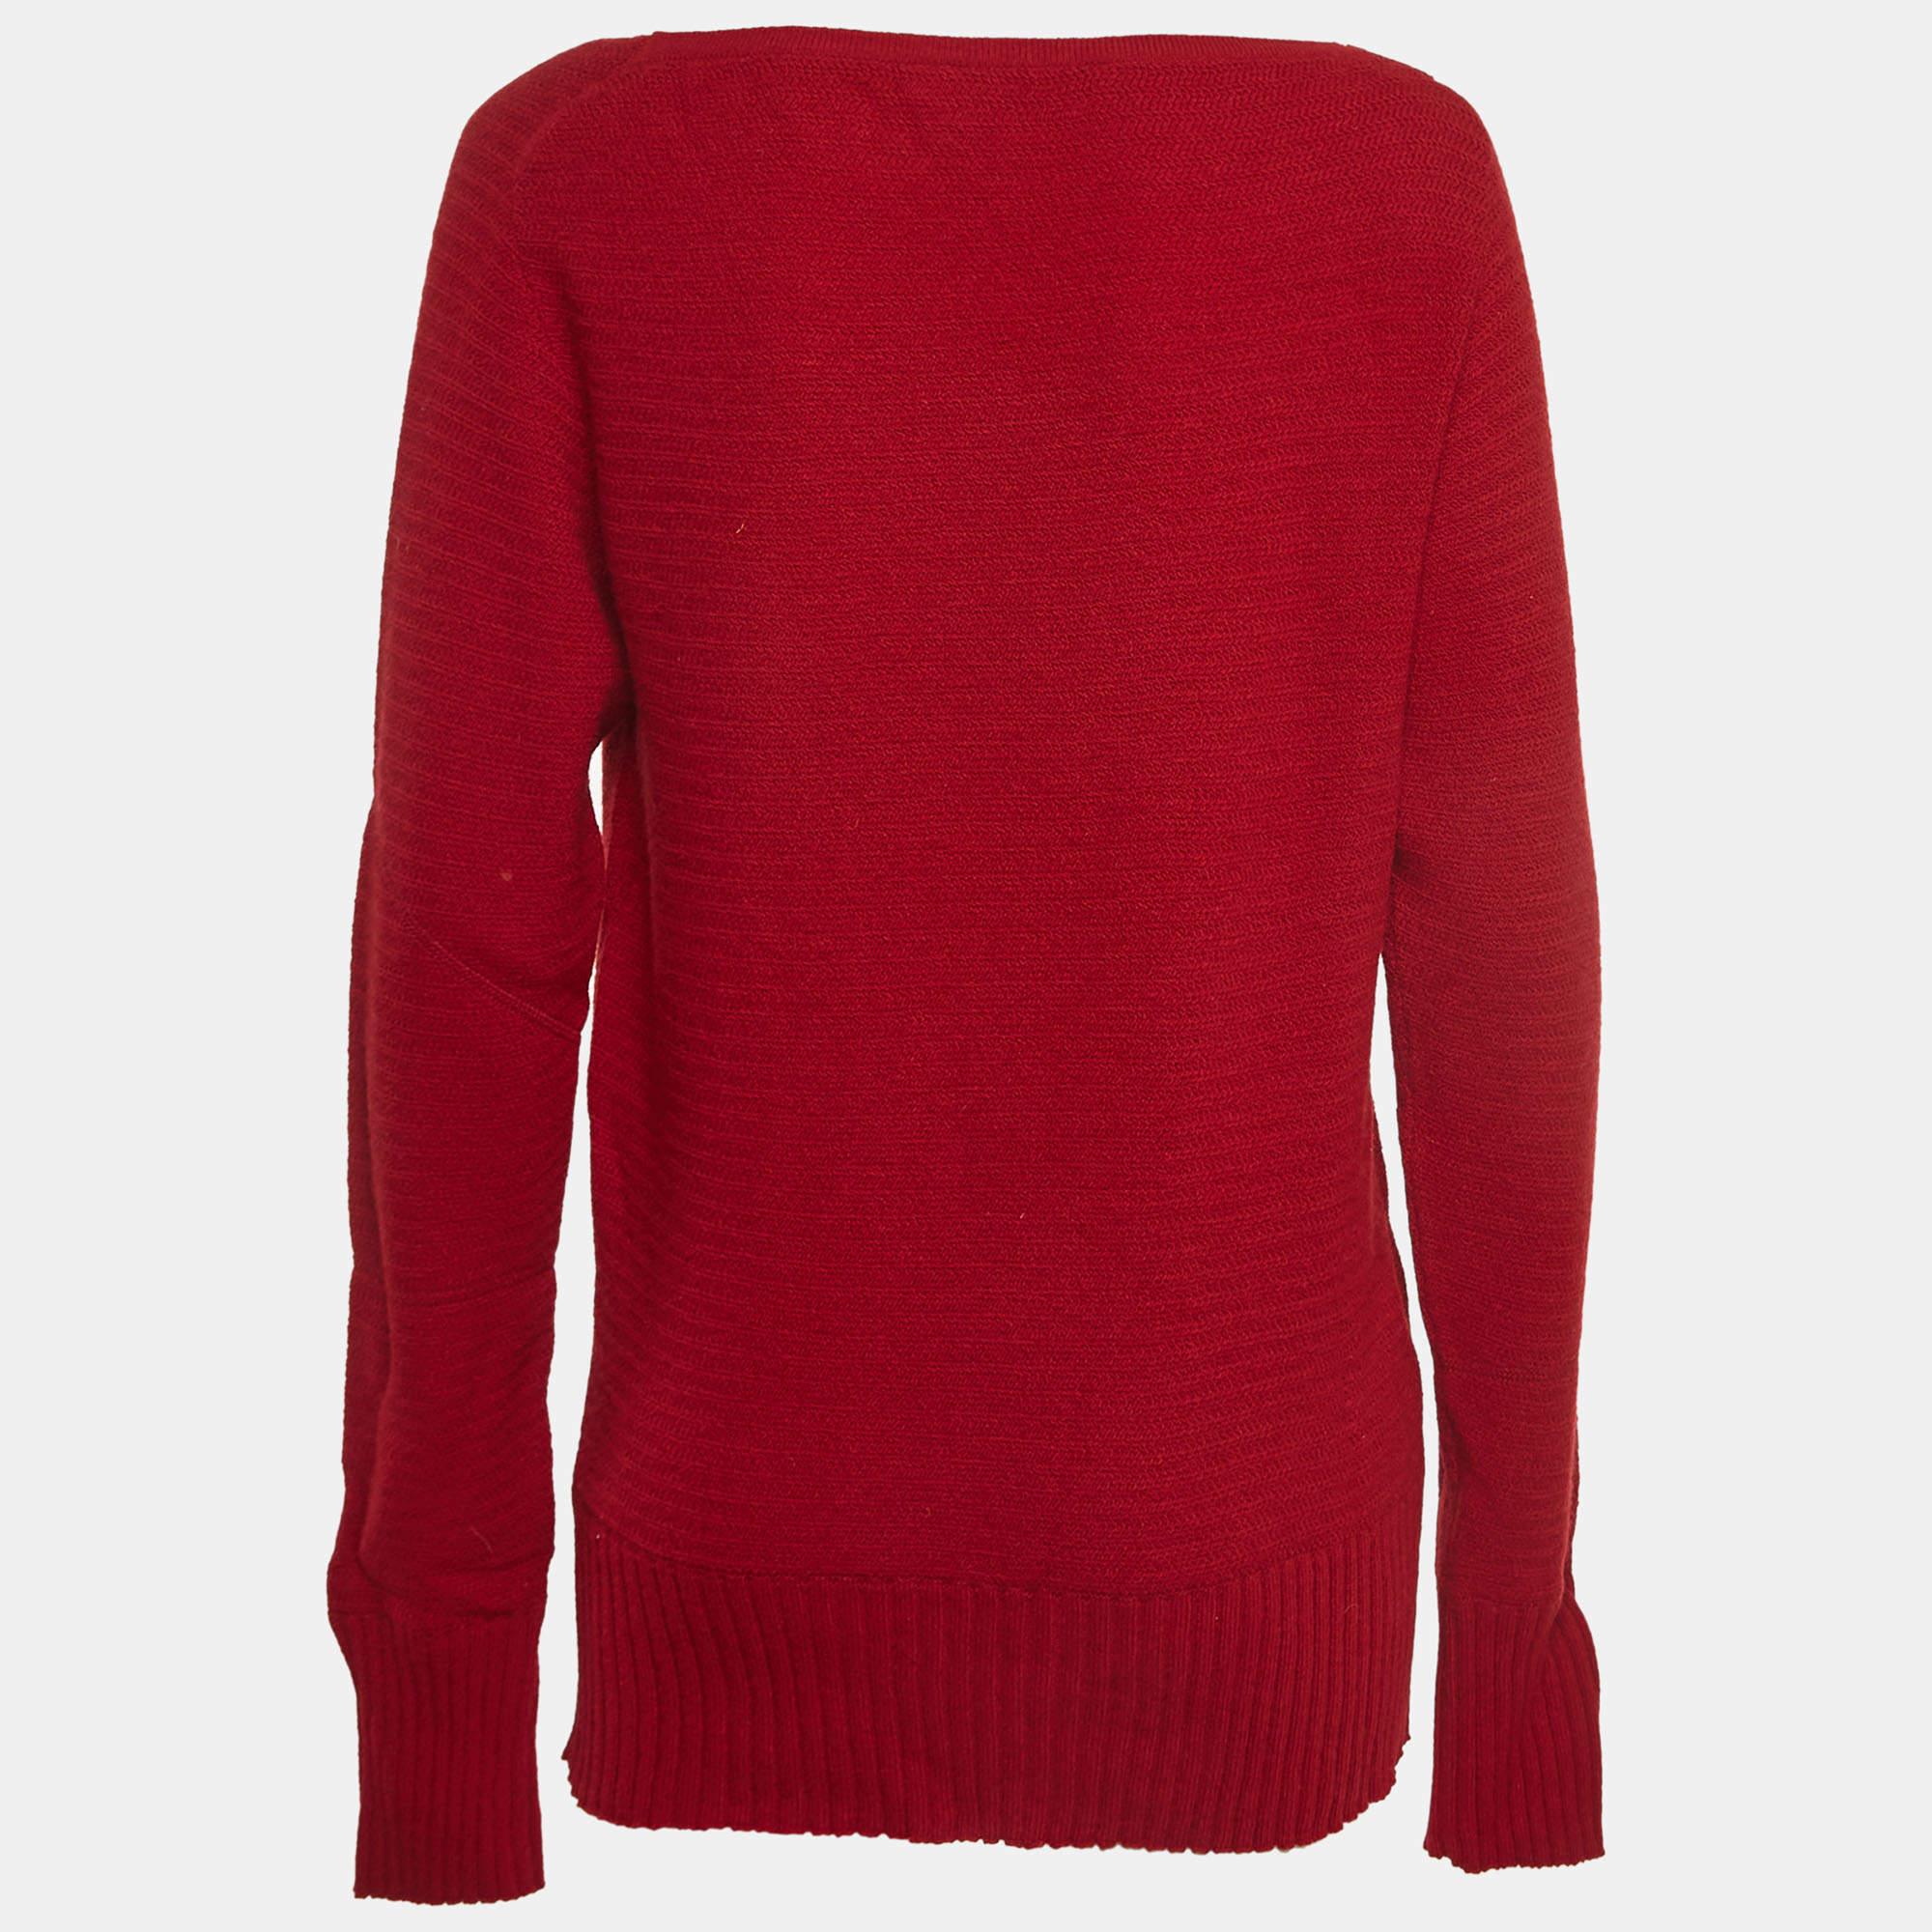 The Christian Dior Boutique sweater is a luxurious fashion statement, marrying comfort and style. Crafted with precision, the vibrant red hue complements the cozy wool blend. The intricate knit showcases Dior's timeless elegance, making it a